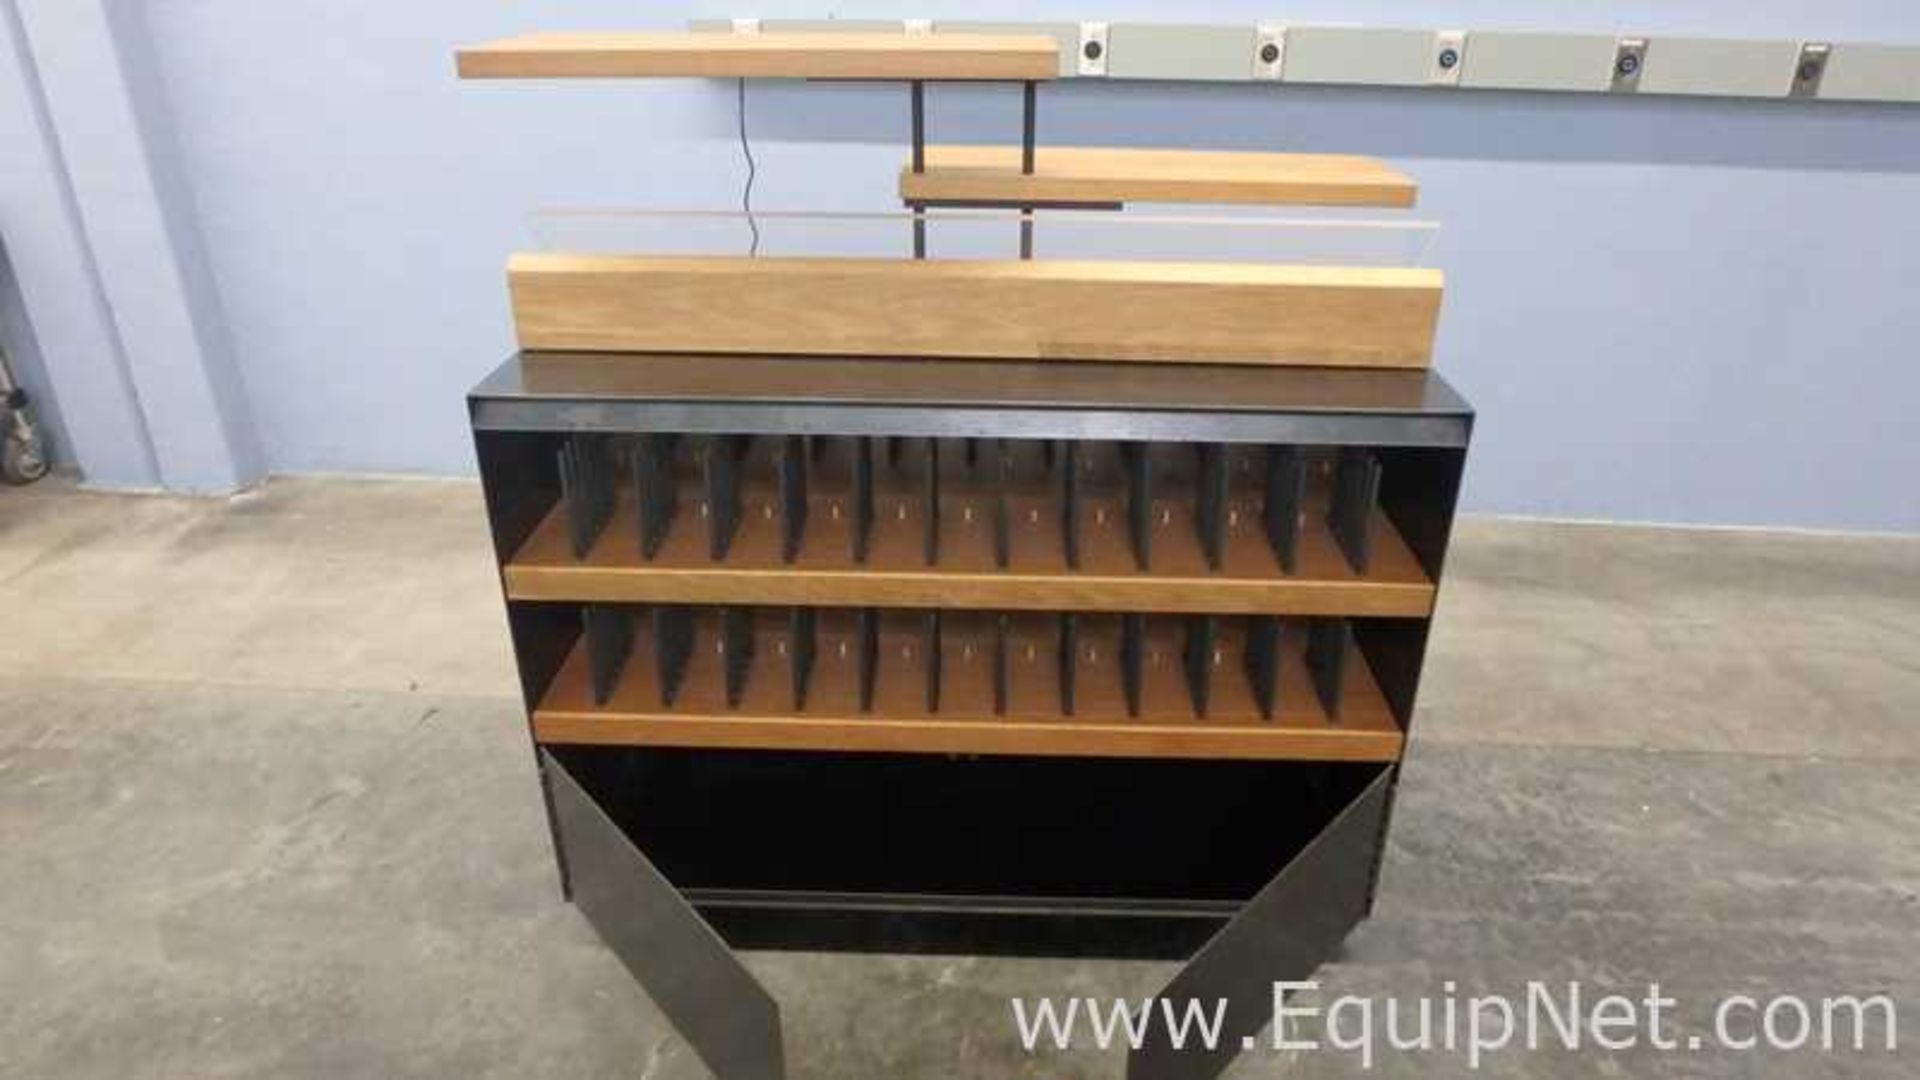 Heady Duty Product Display and Storage Cabinet - Image 4 of 5